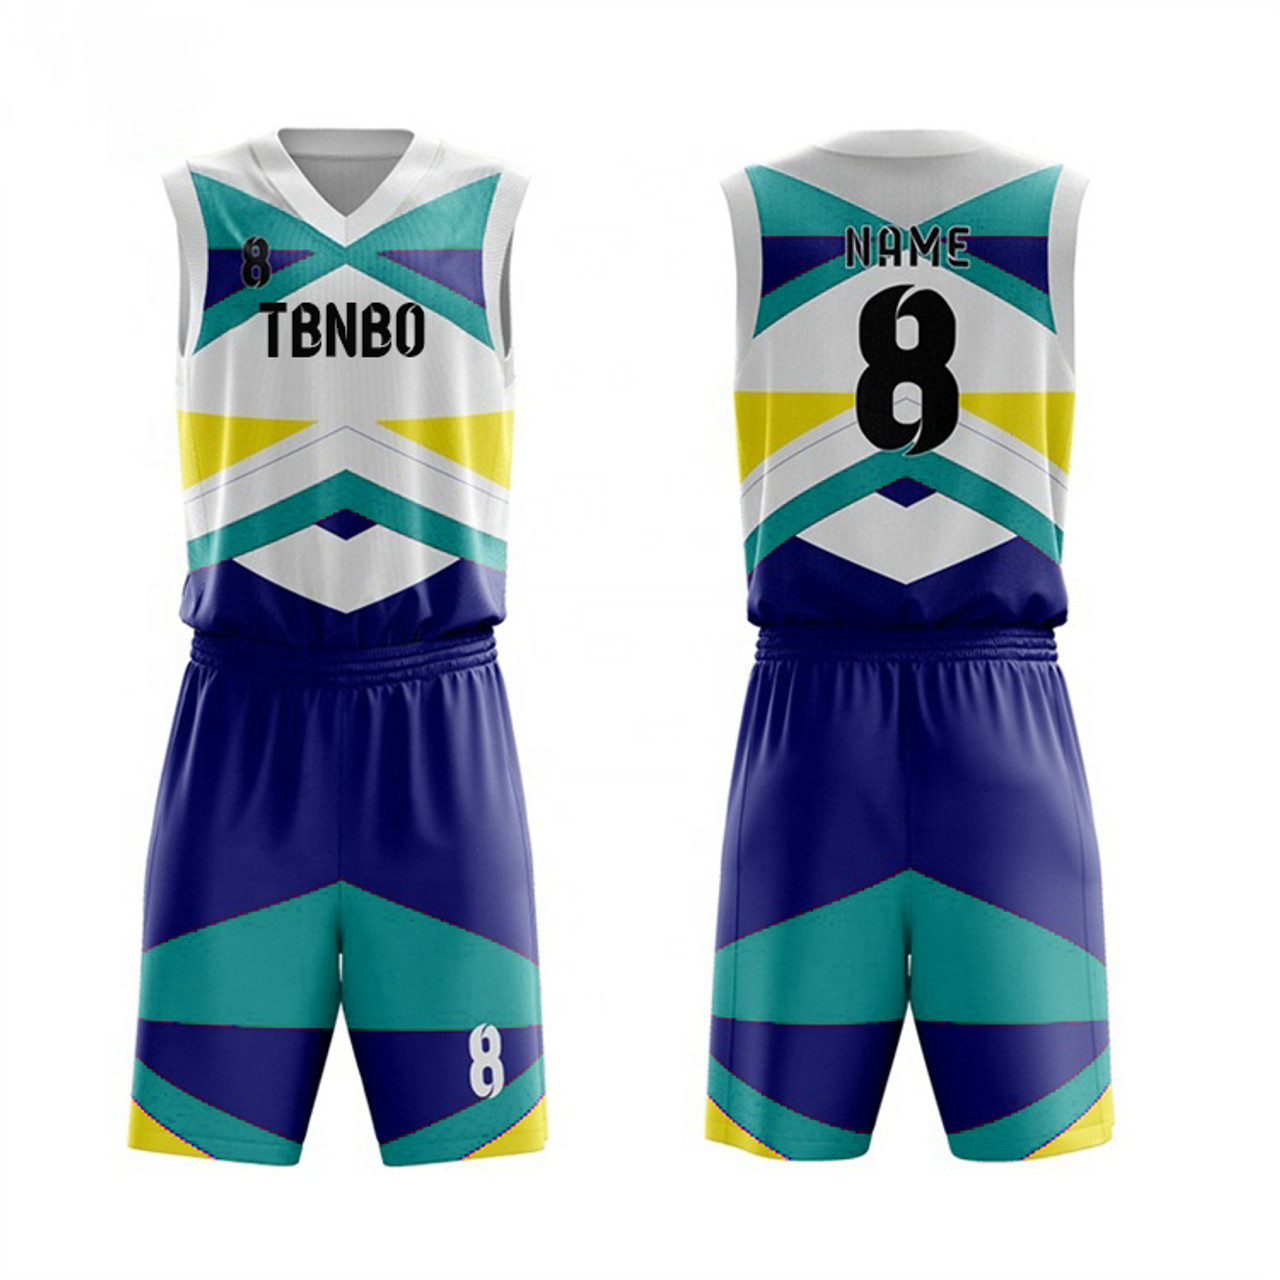 Custom Your Own Team Basketball Uniforms Mens Sublimation Printed